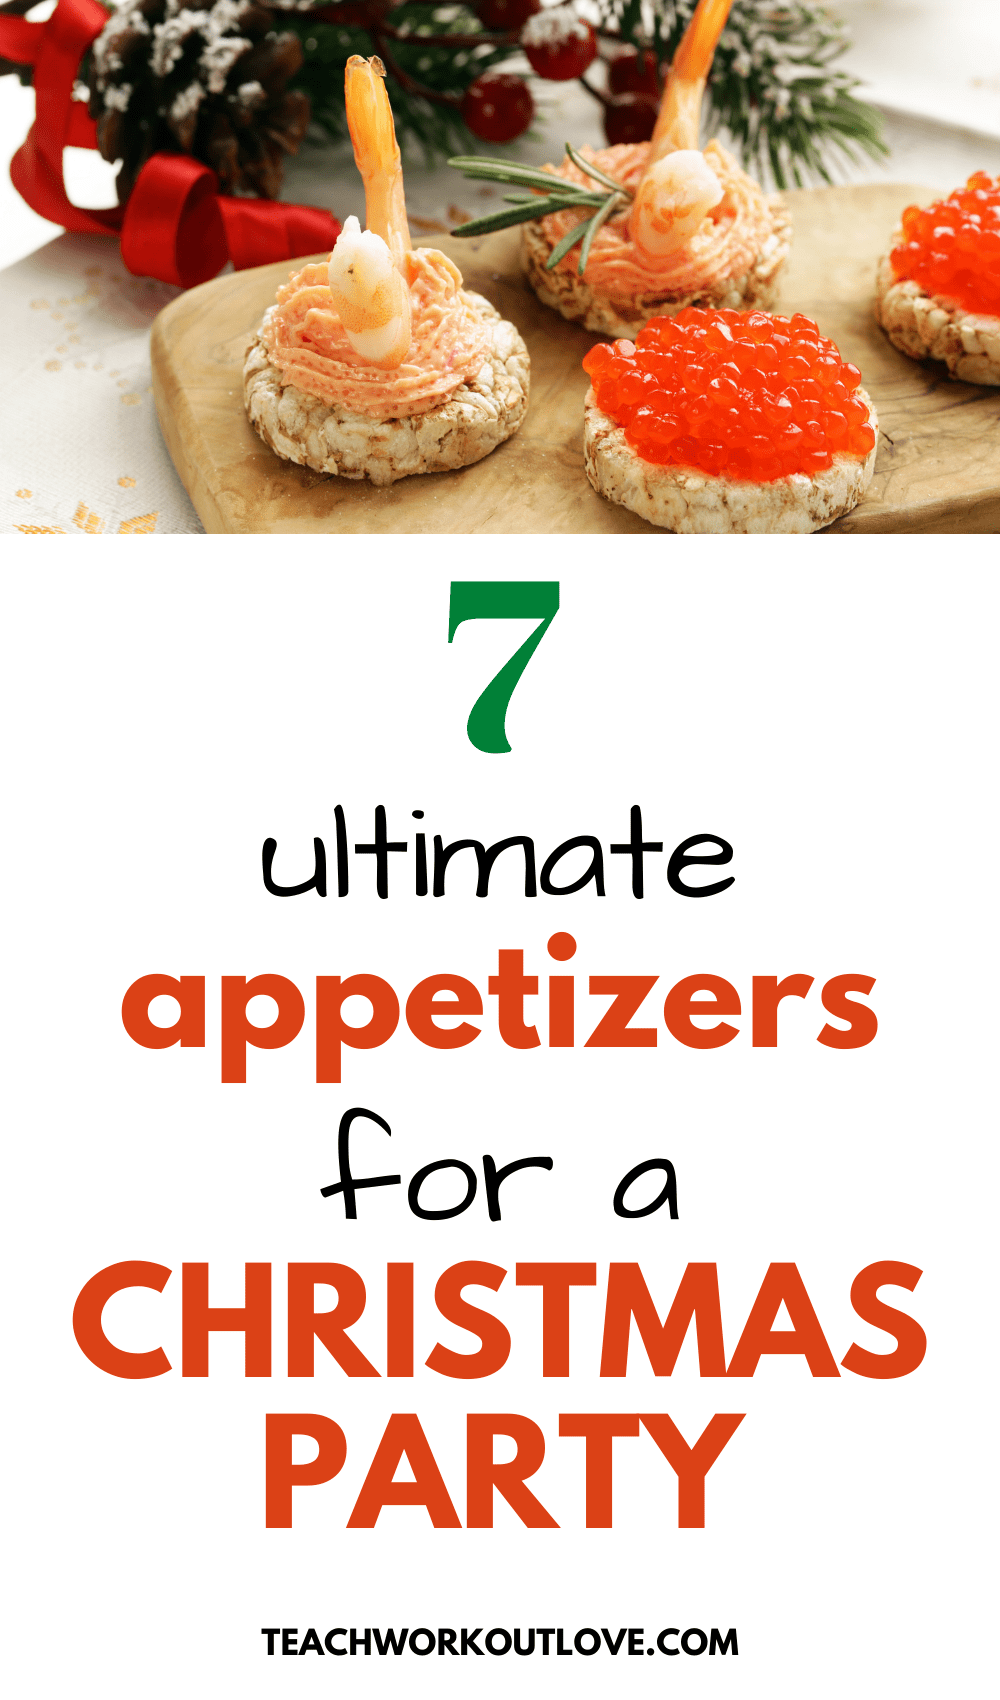 This year, have the menu planned out with the best appetizers for your Christmas party. Read on to find out what appetizers you should have this year!